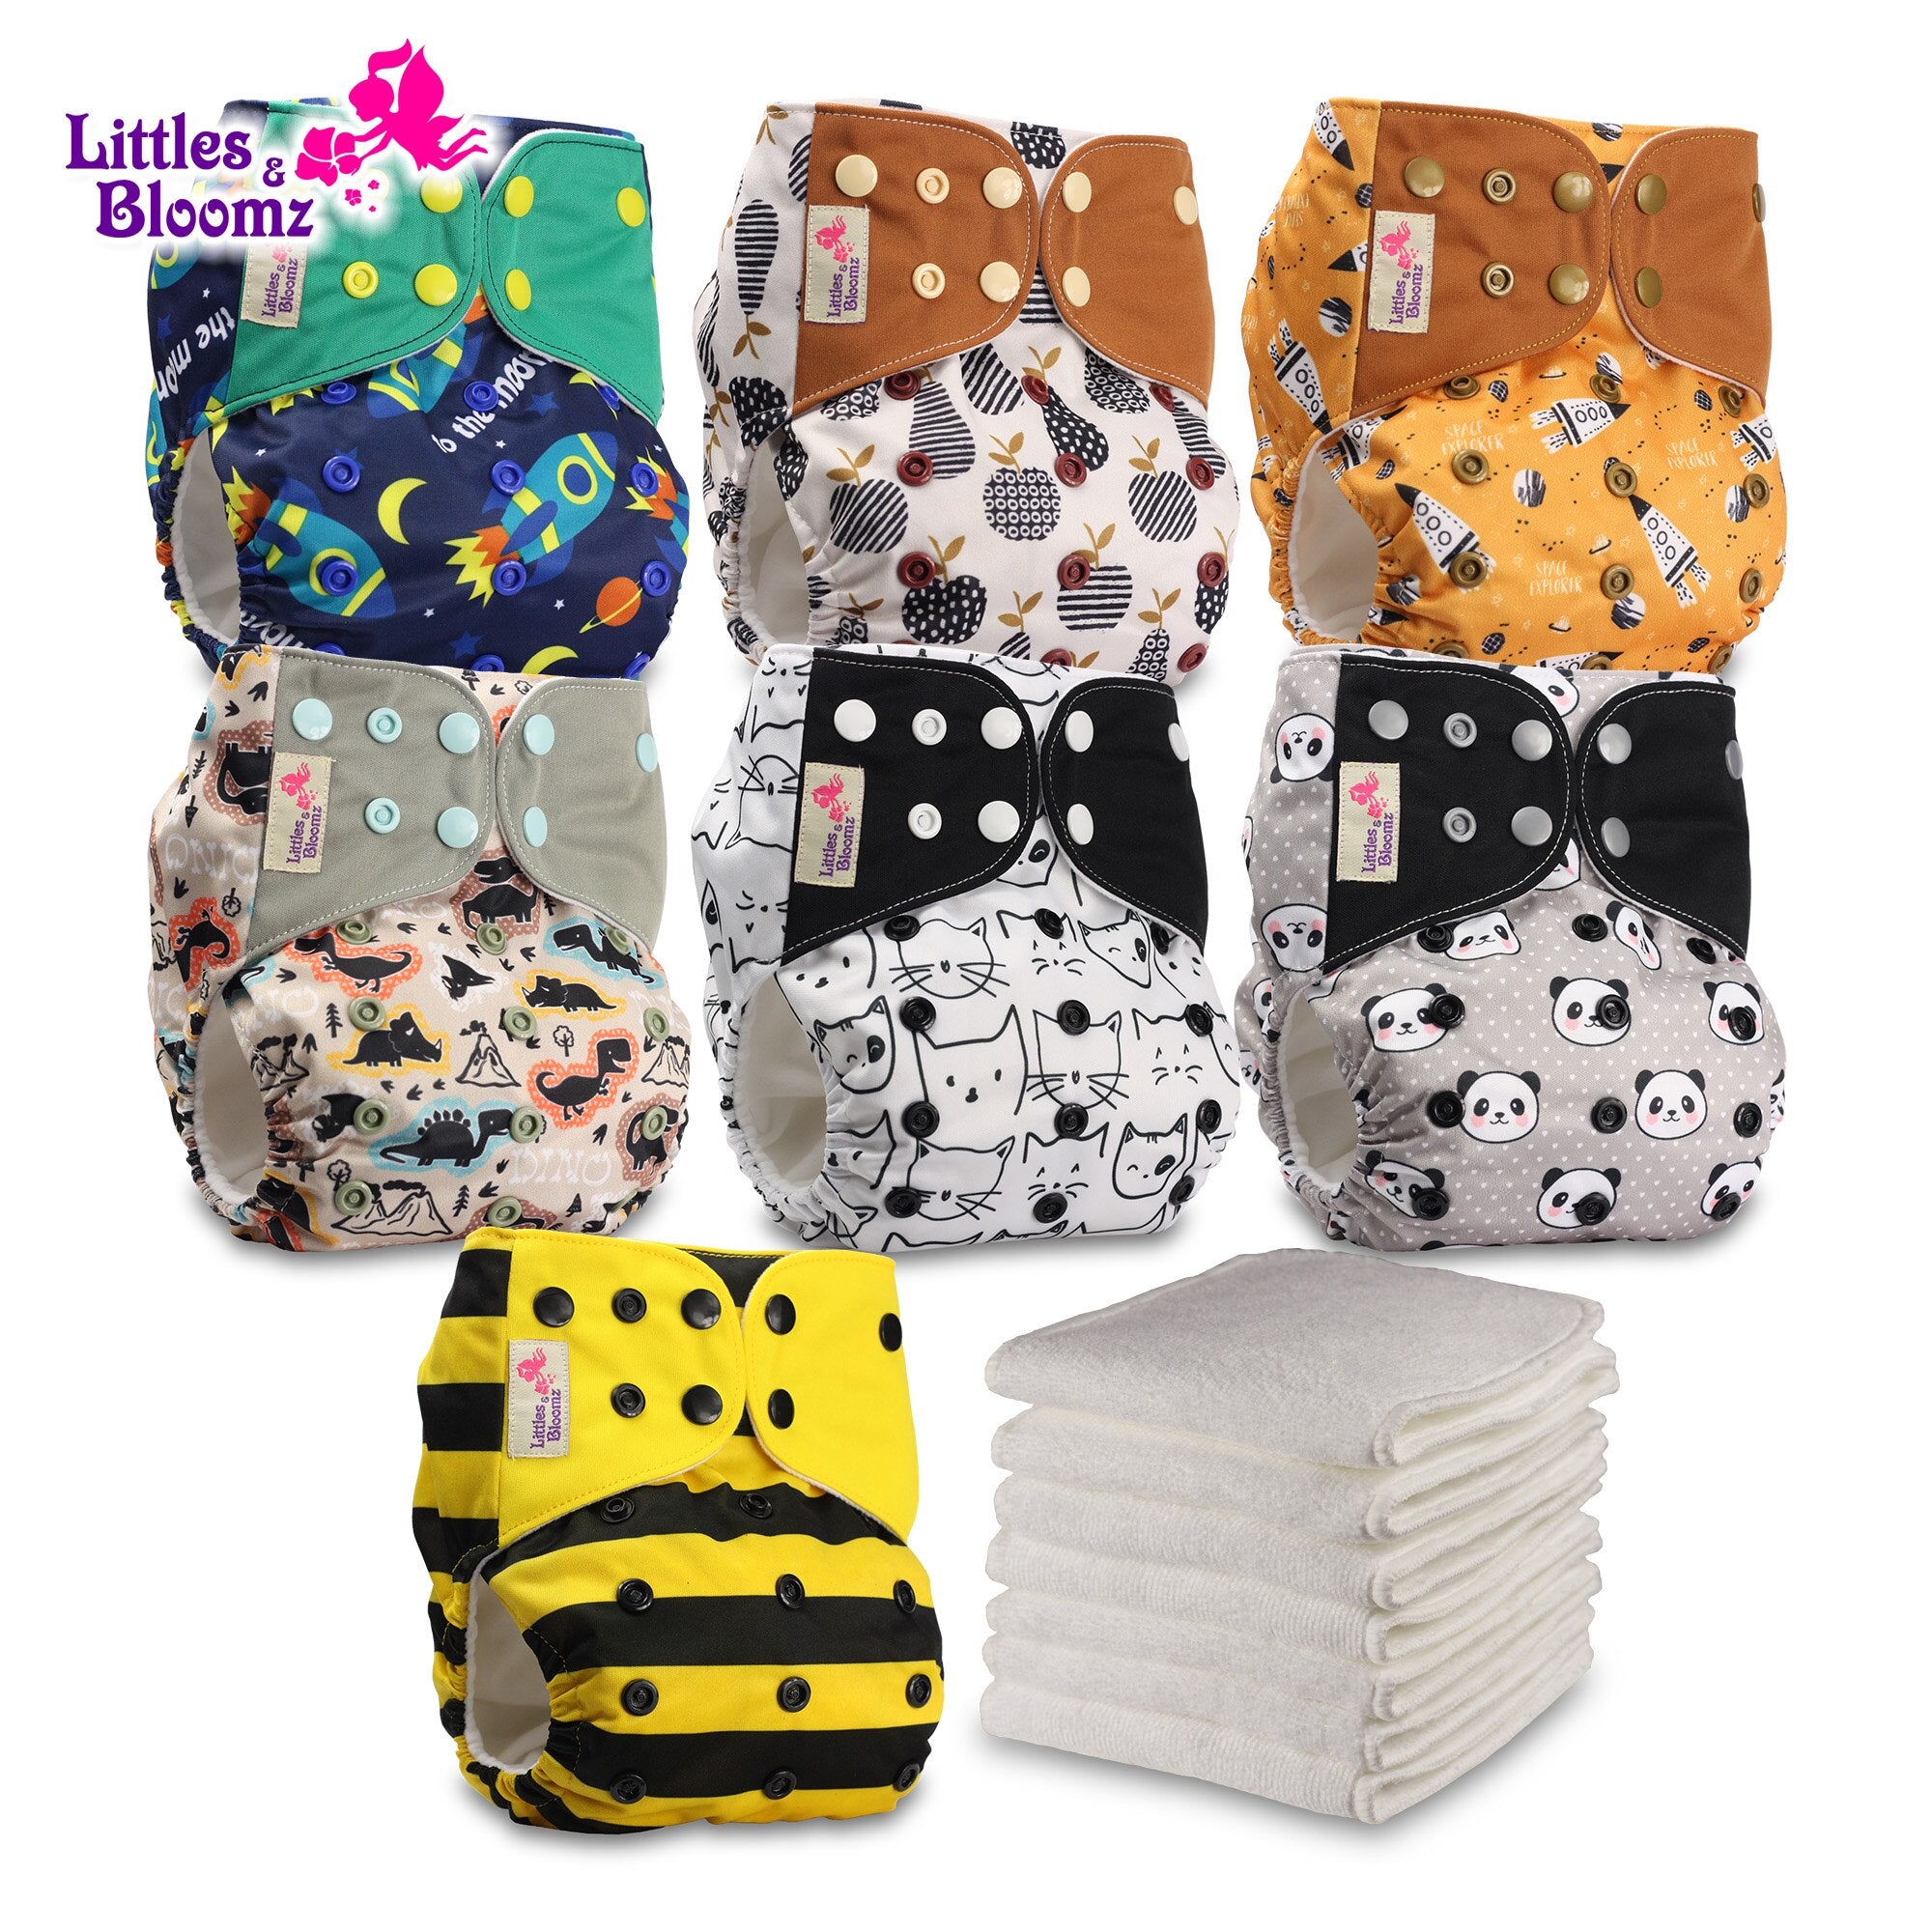 [Littles&Bloomz]7 Diapers +7 Inserts in One Set Baby Washable Reusable Real Cloth Pocket Ecological Nappy Diaper Cover Boy Girl